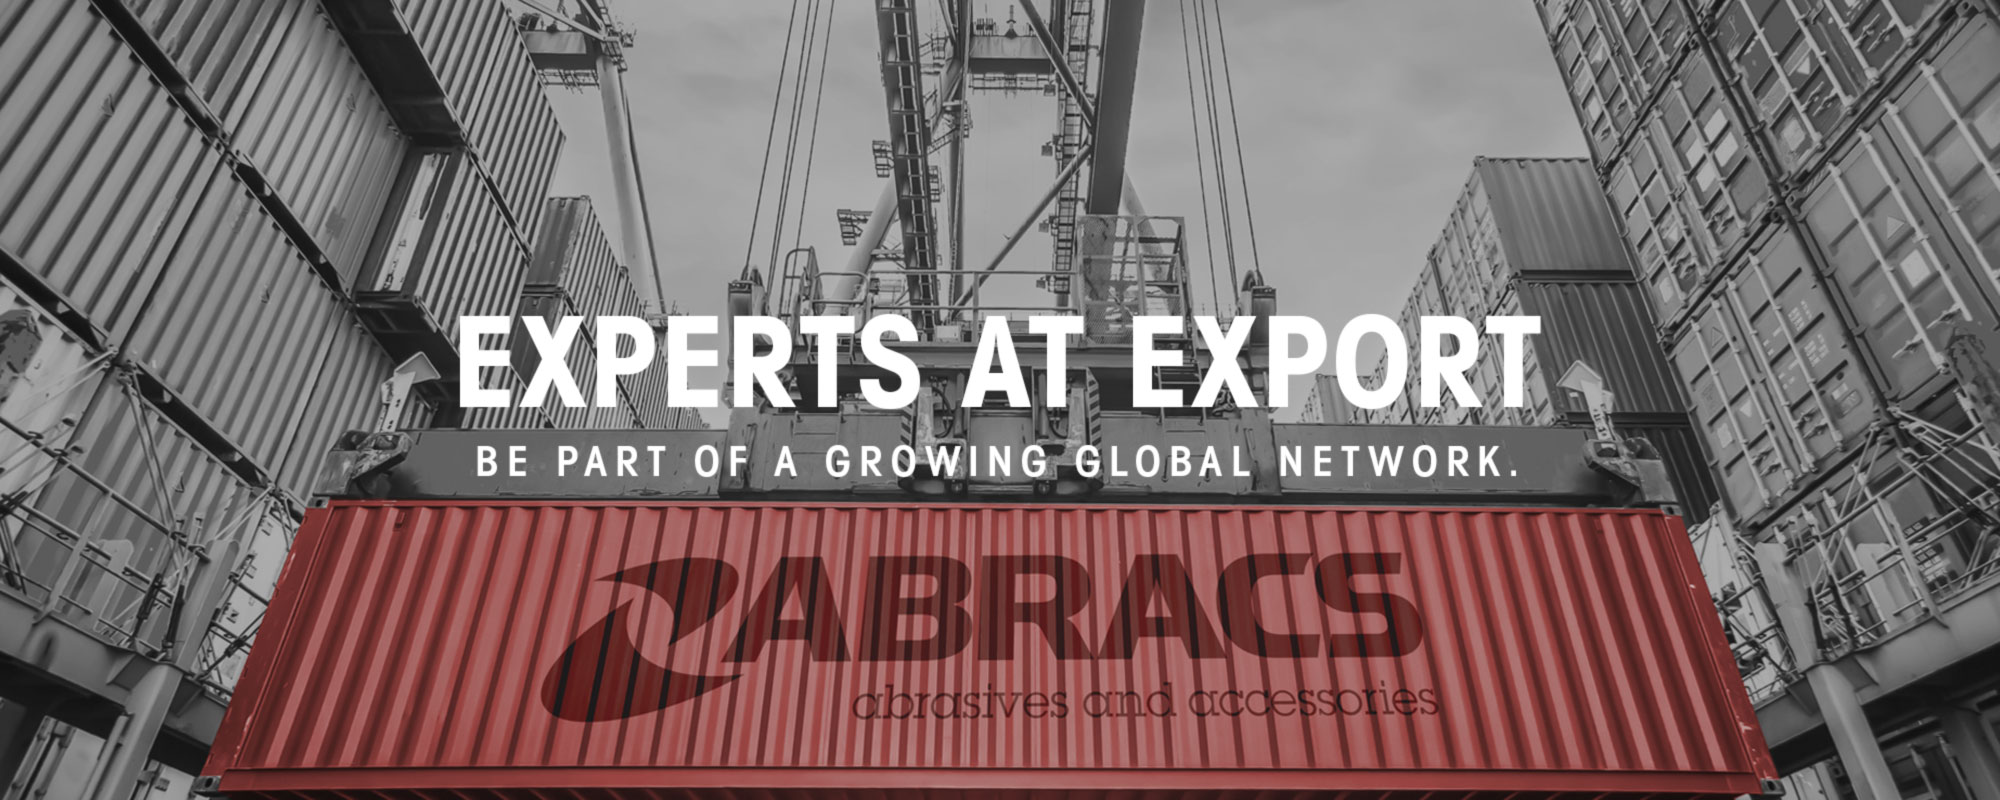 Experts At Export, be part of a growing global network